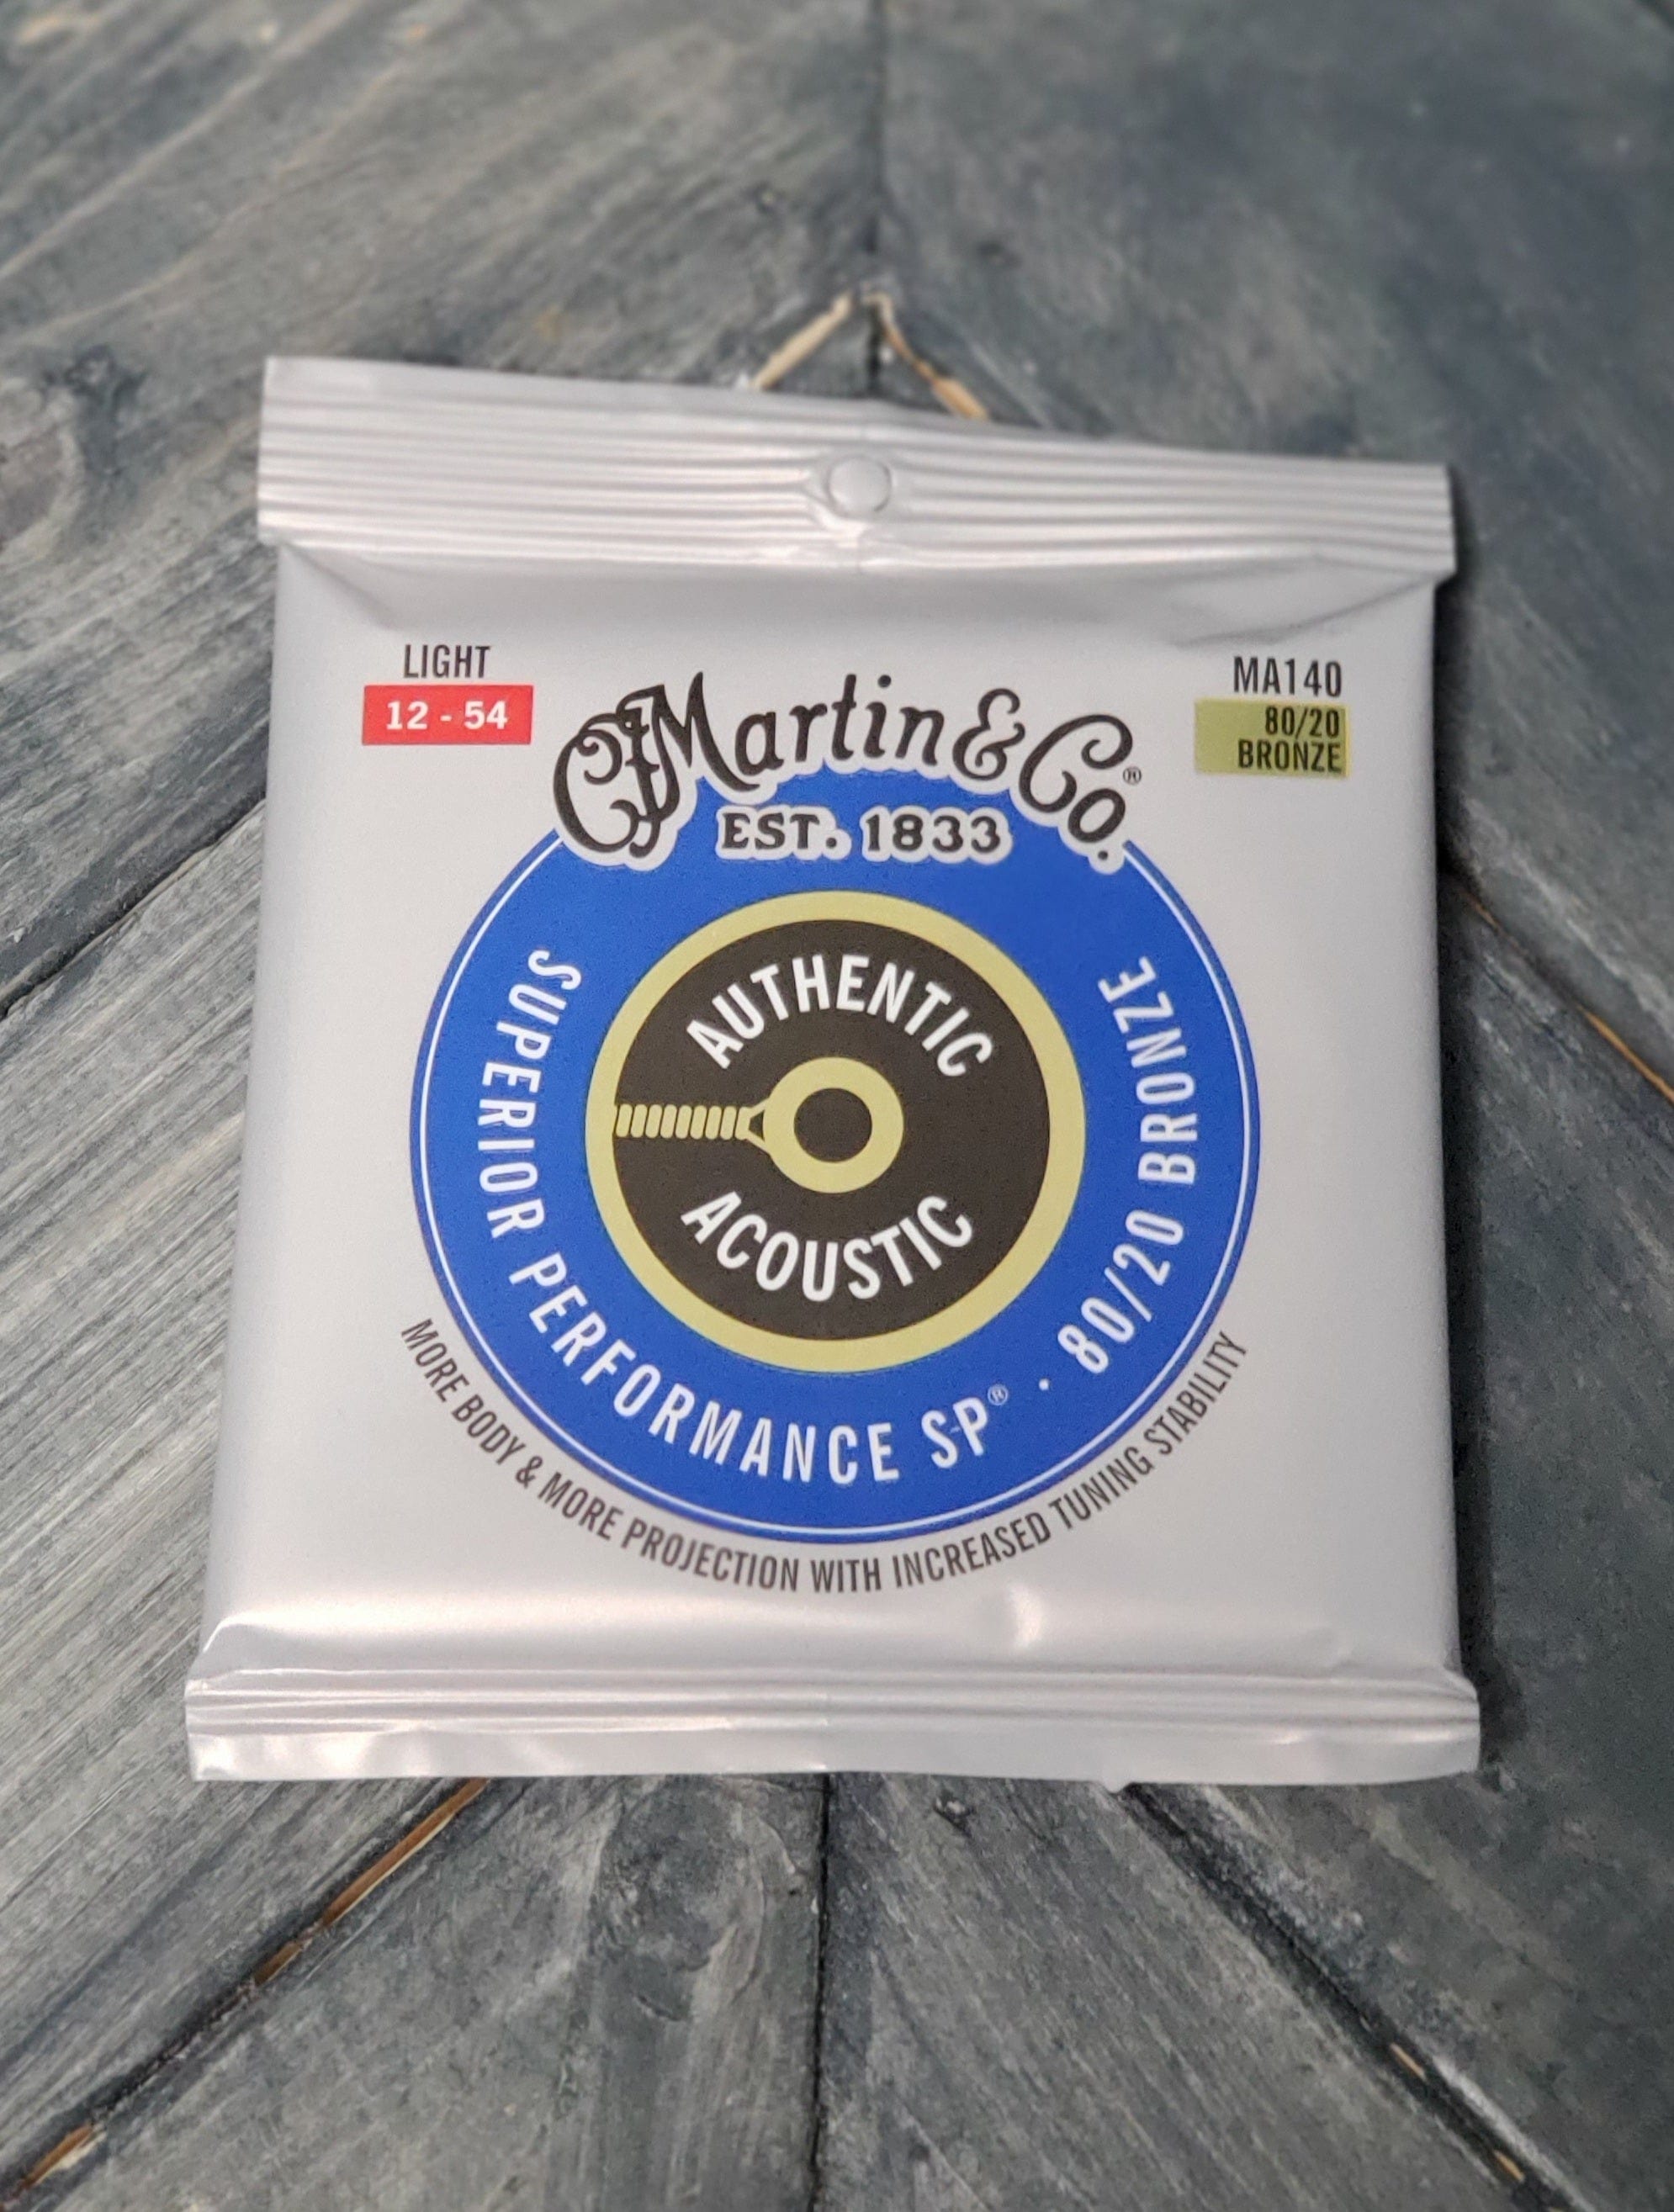 C.F. Martin Guitars Strings Martin MA140 Authentic Acoustic Superior Performance 80/20 Bronze Guitar Strings - .012-.054 Light